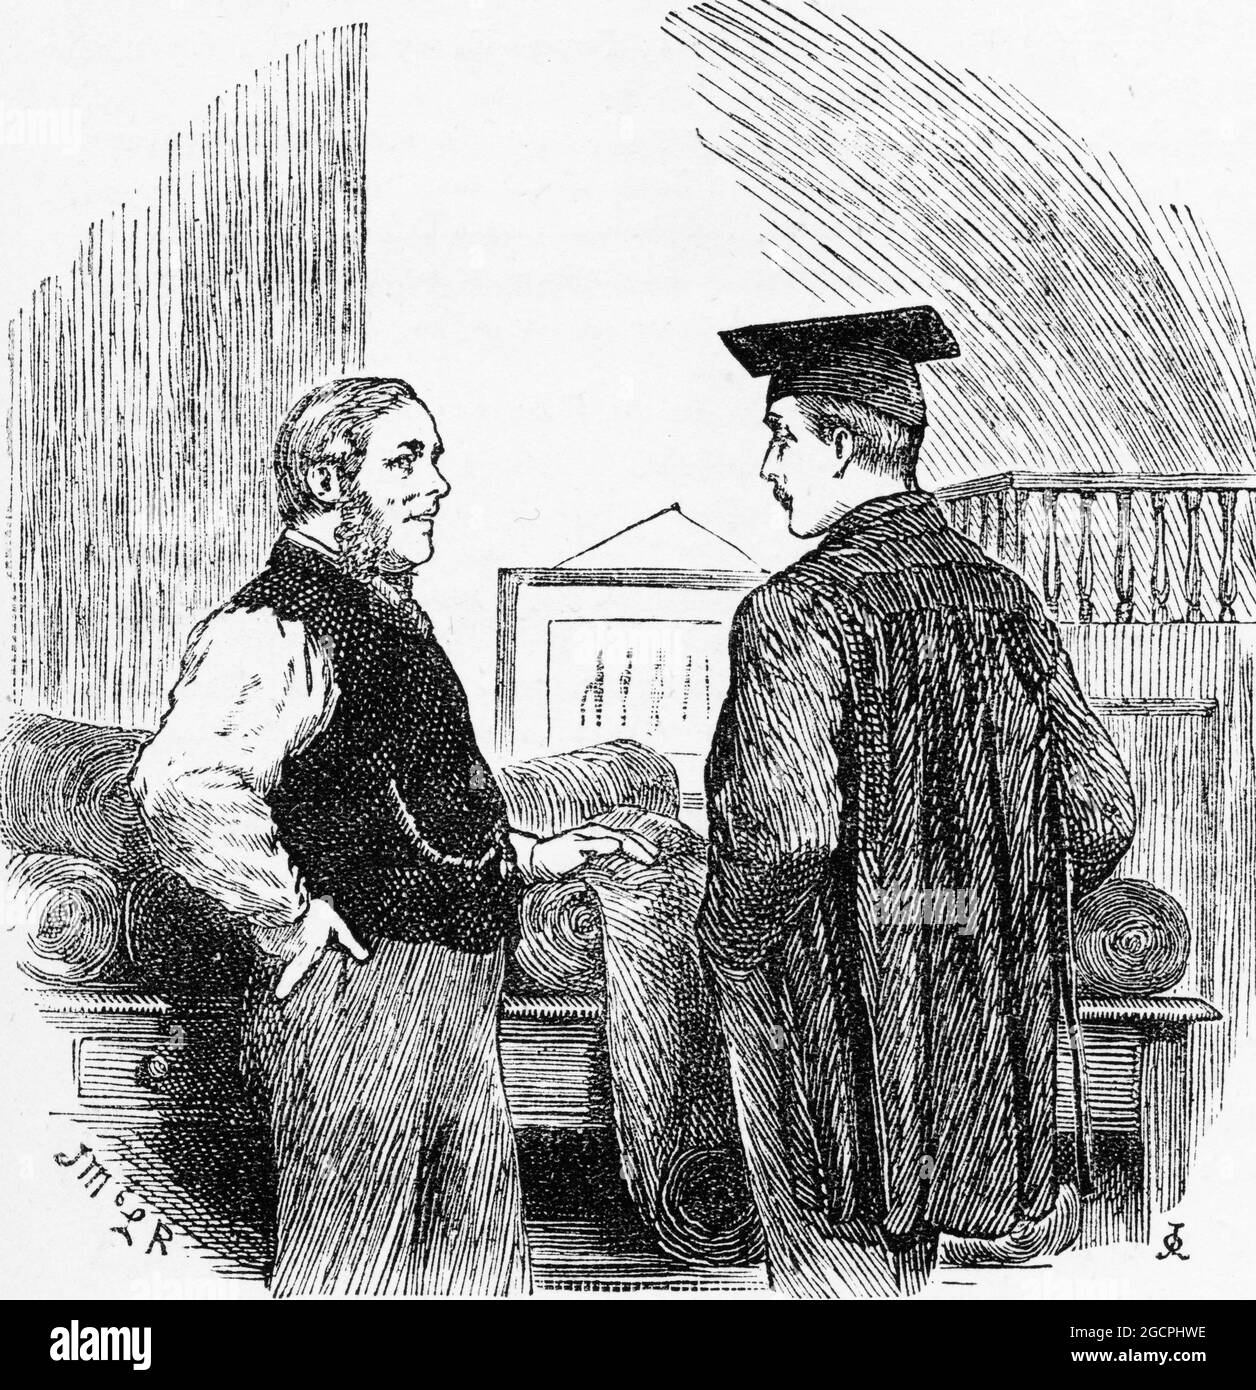 Engraving of a man in his graduation outfit discussing an order with his tailor Stock Photo